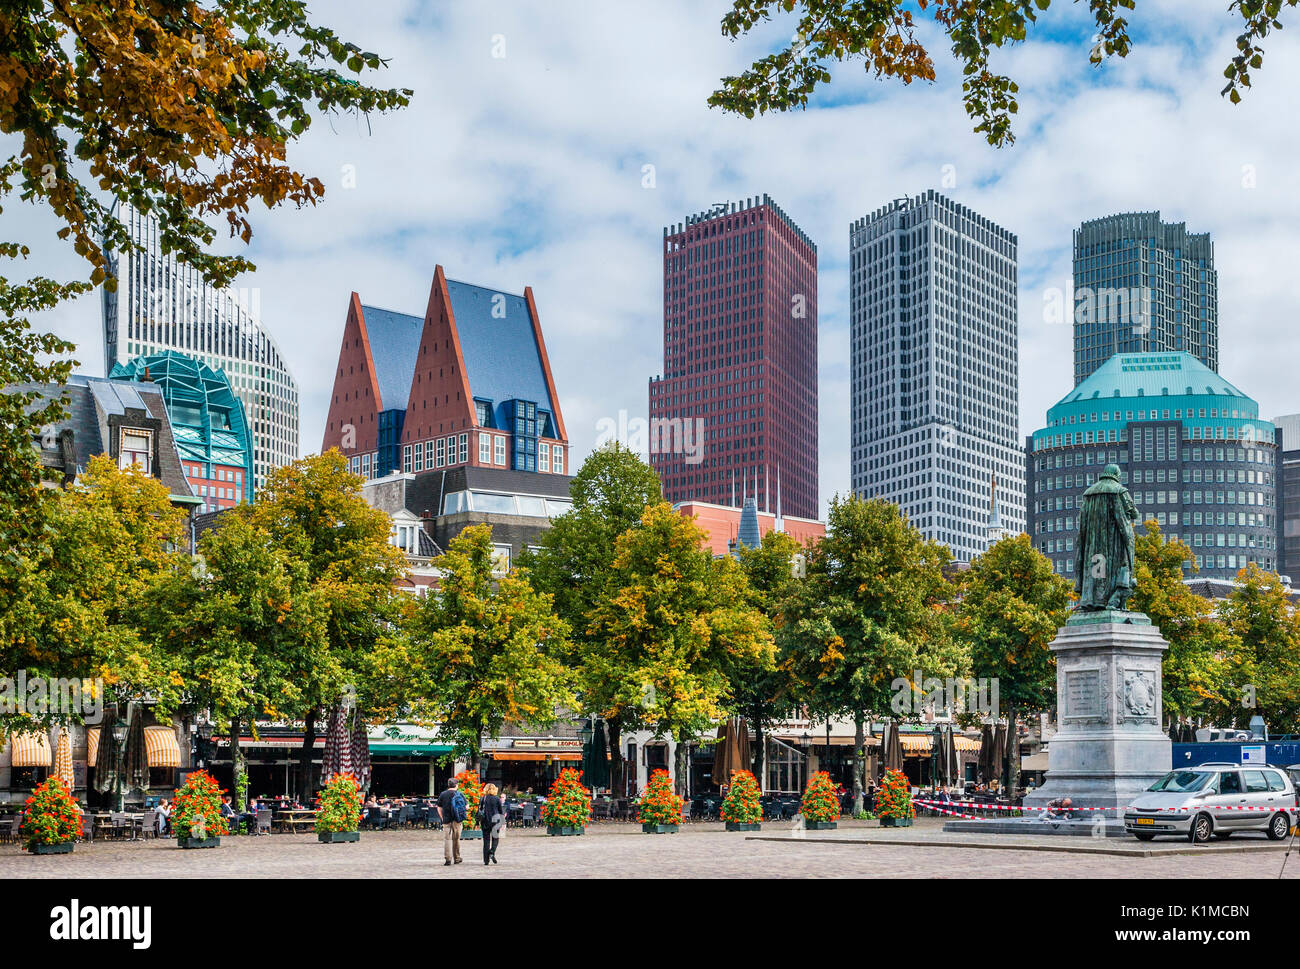 Netherlands, South Holland, The Hague (Den Haag), Het Plein (The Square), modern highrise panorama seen from the Plein Stock Photo